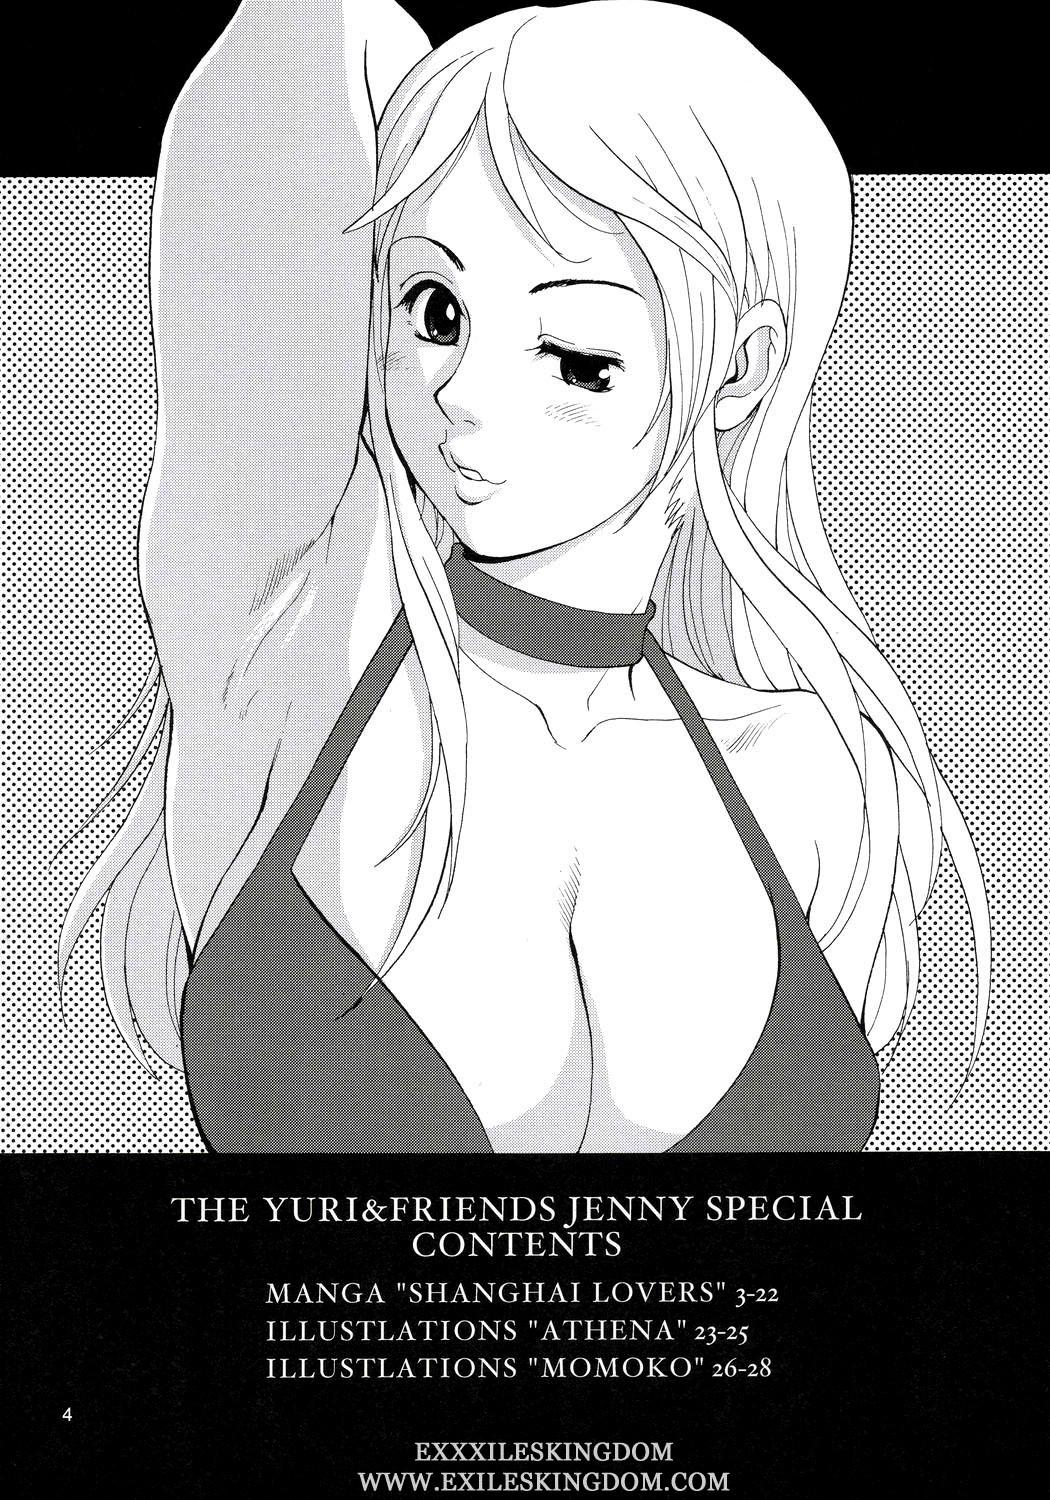 Ameteur Porn Yuri & Friends Jenny Special - King of fighters Gagging - Page 3